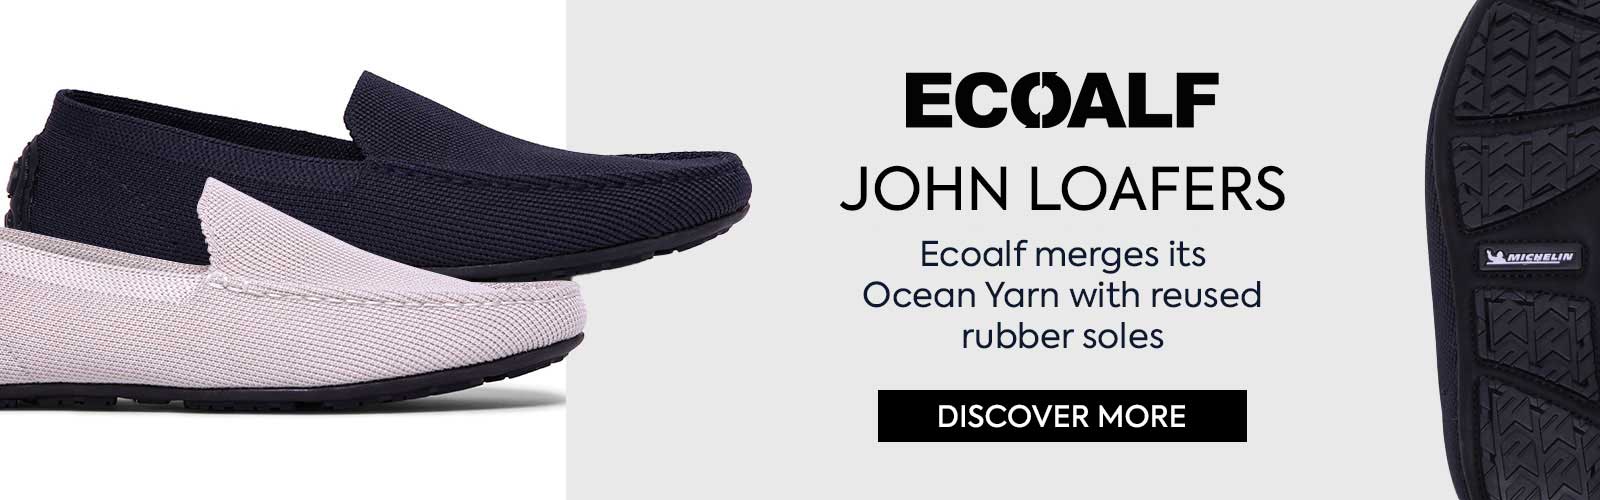 Ecoalf: advanced technology for sustainable footwear production